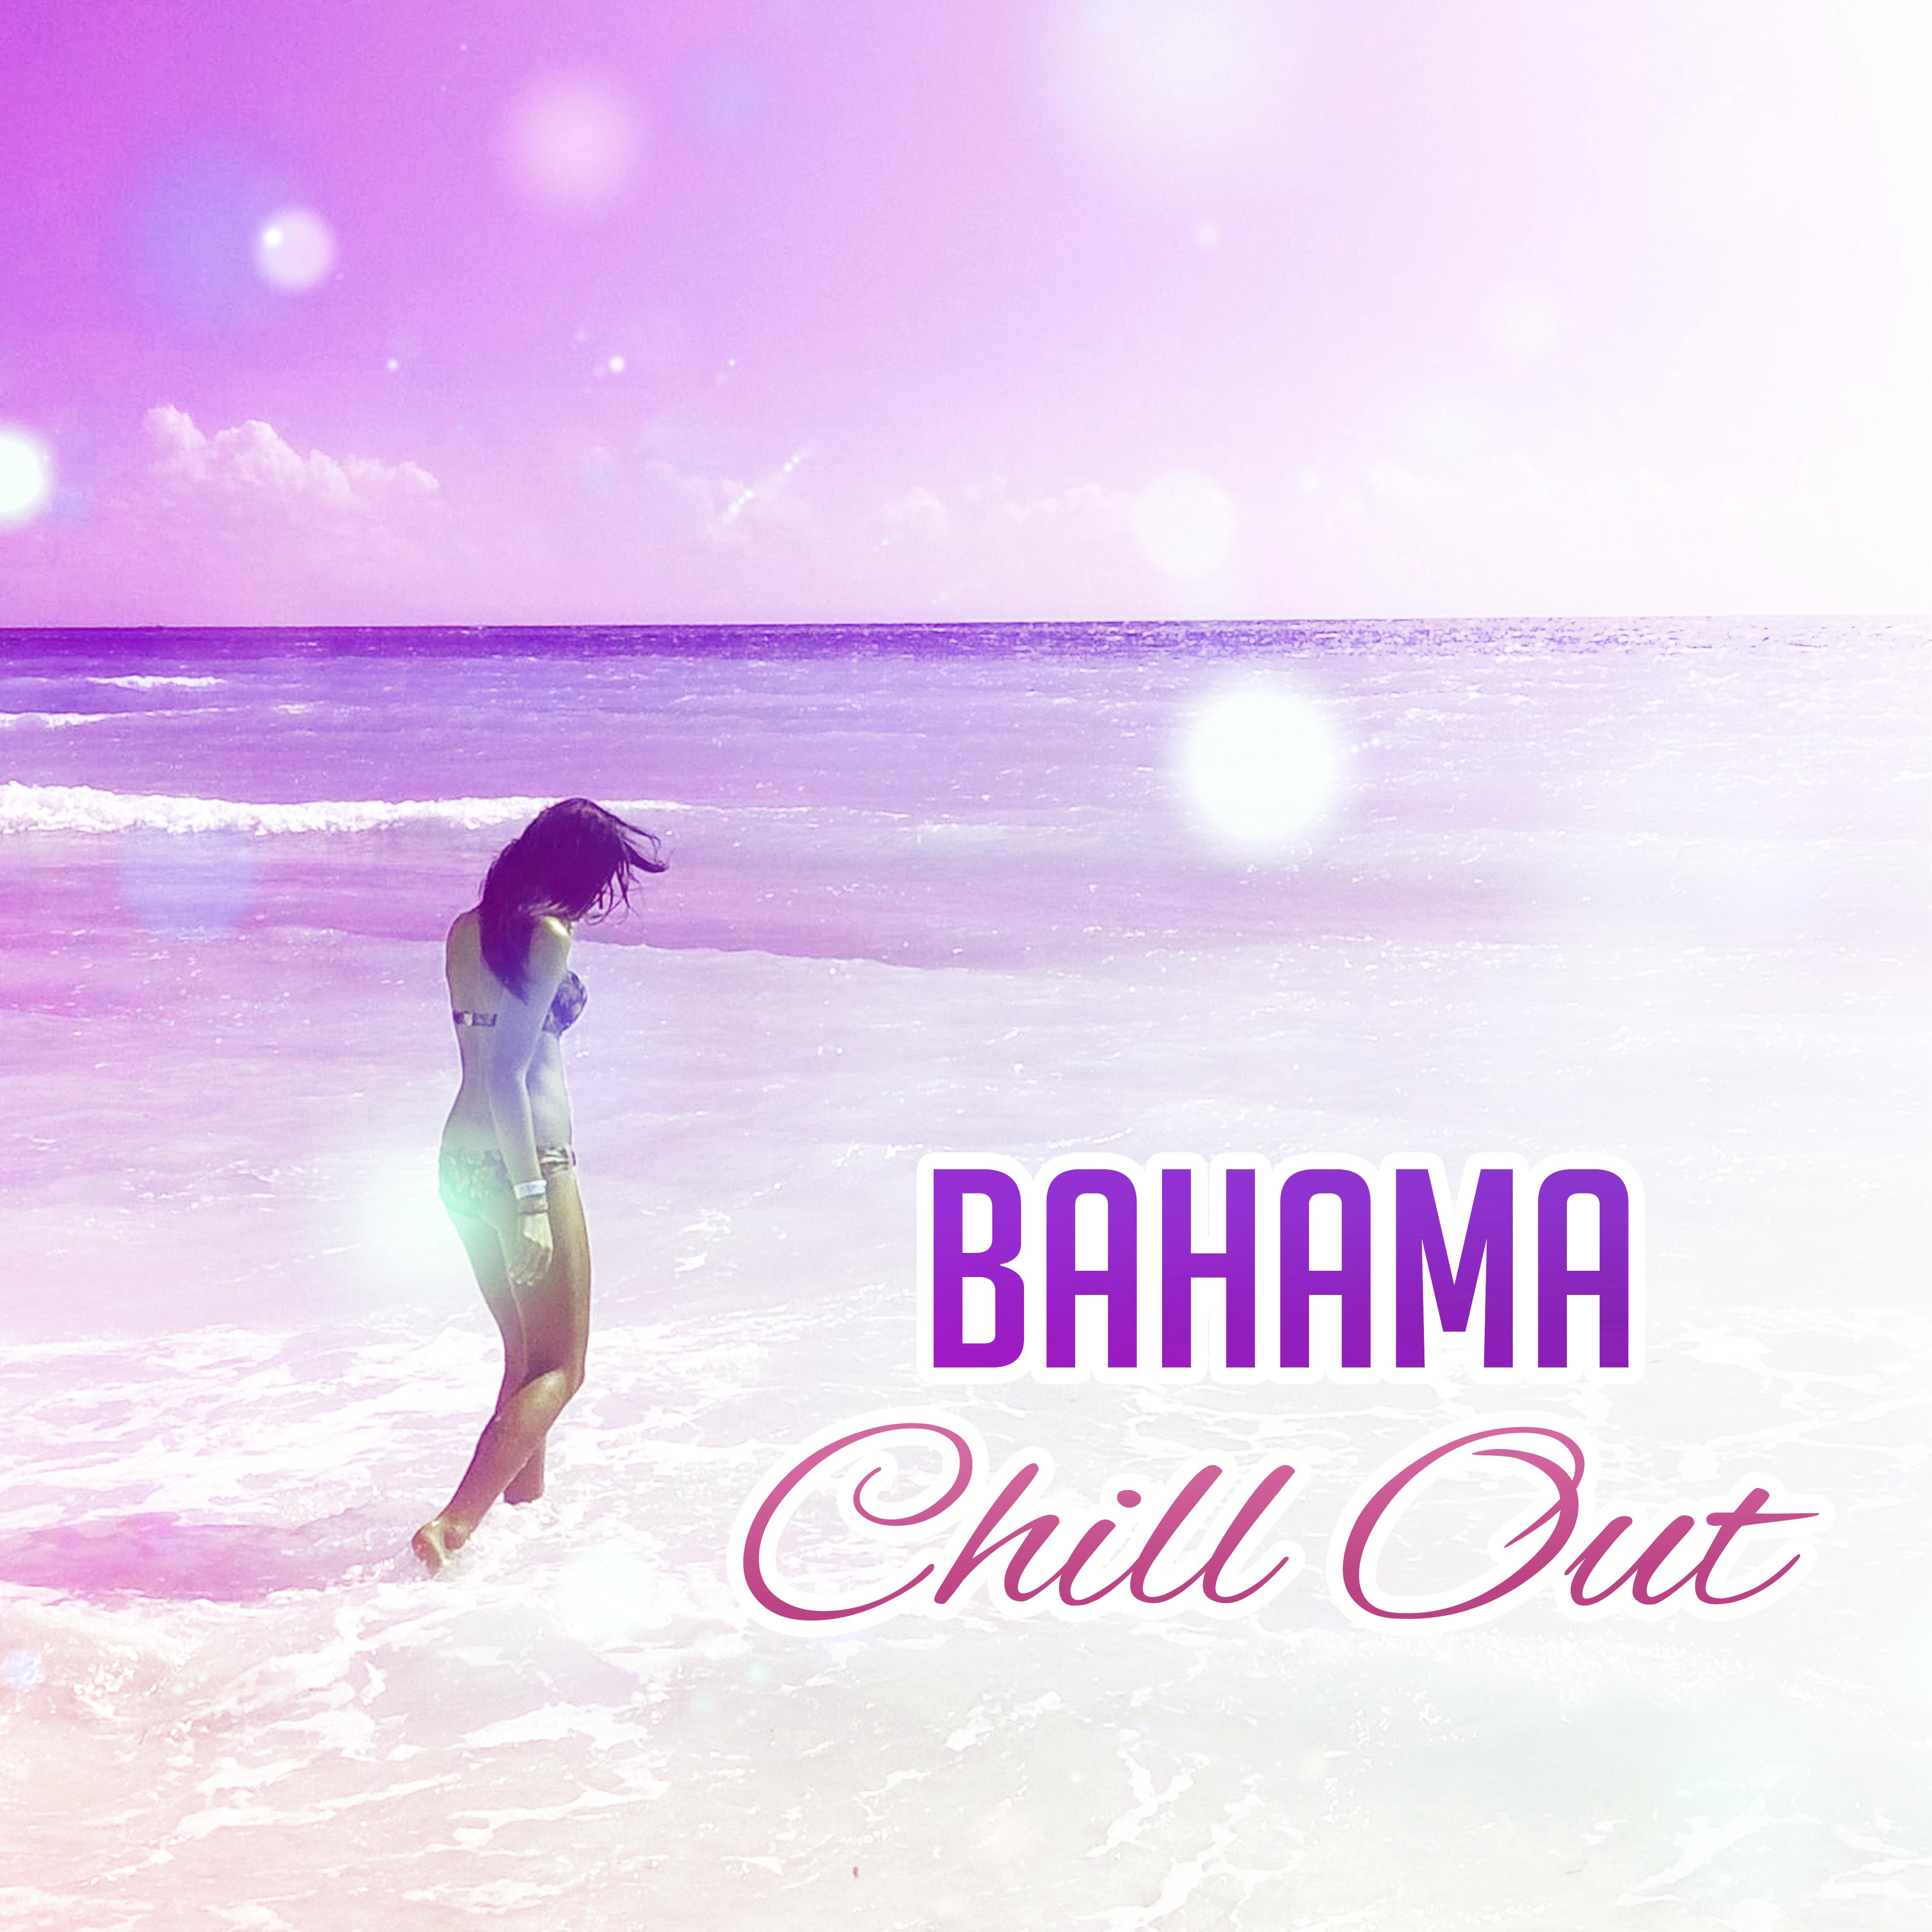 Bahama Chill Out – Summer Chill Out 2017, Holiday Vibes, Stress Relief, Music to Calm Down